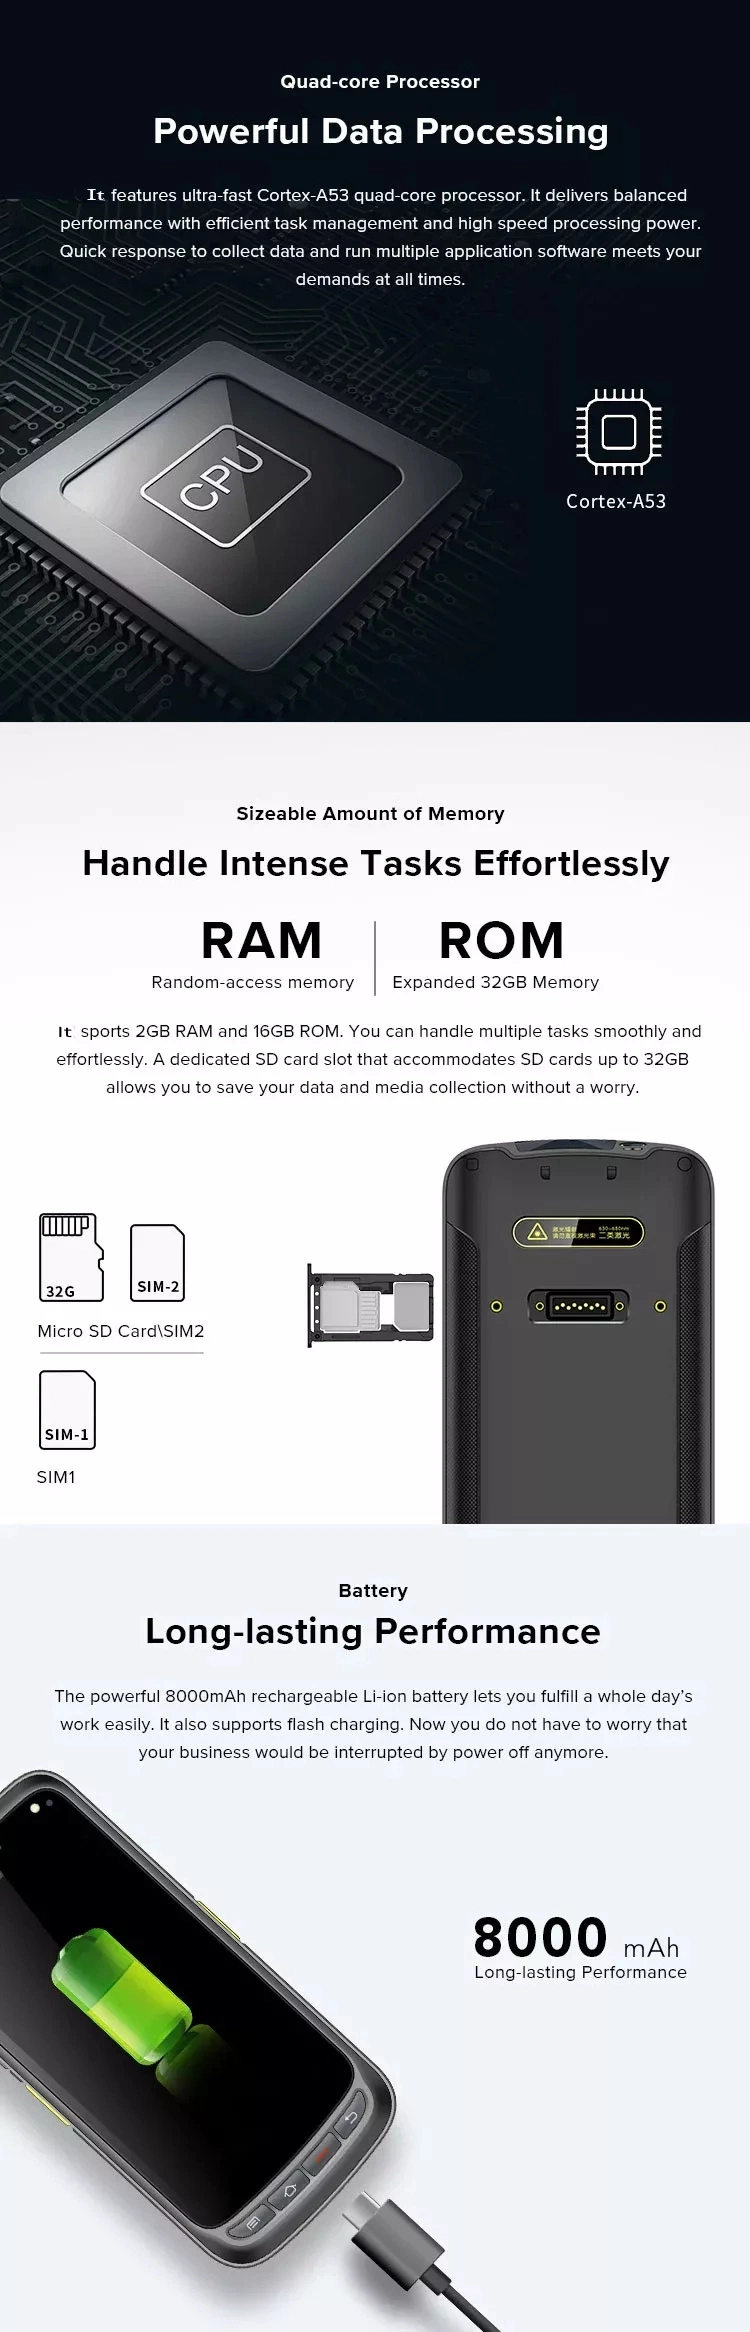 WiFi Barcode 4G Multi-Function Android UHF RFID PDA Wireless Handheld UHF RFID NFC Reader with Charing Base for Inventory Management